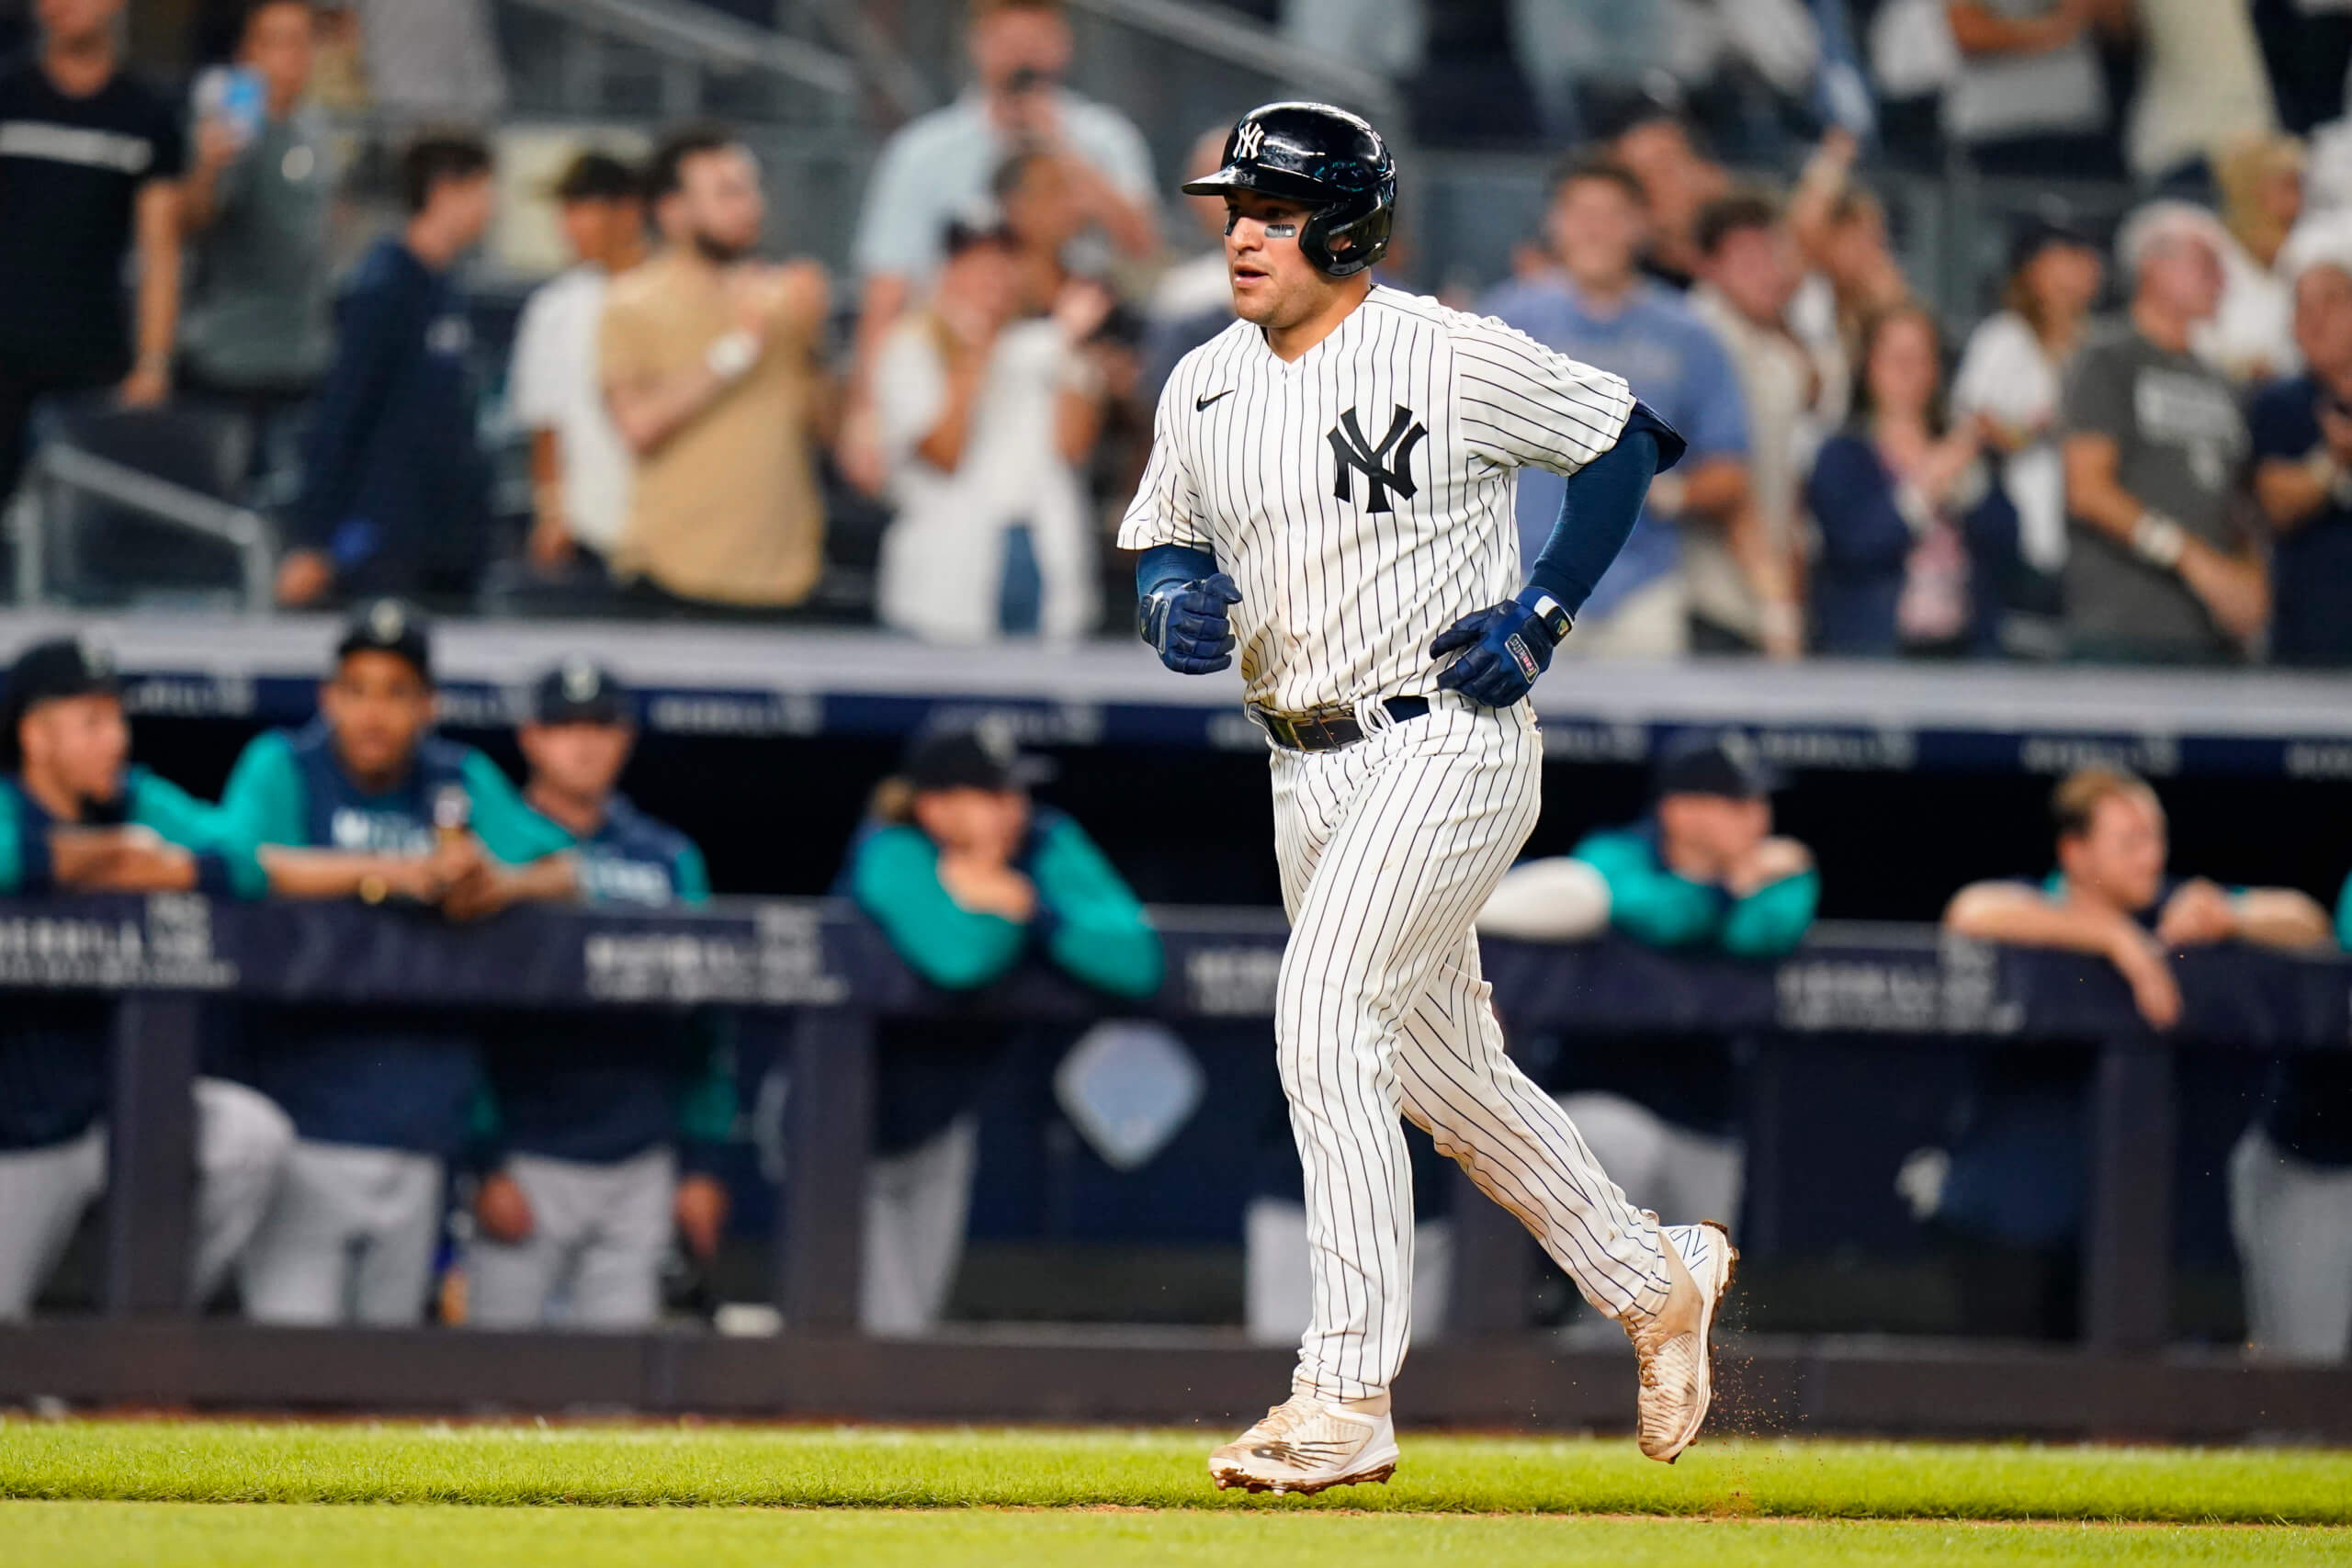 Yankees' Jose Trevino embracing excitement in MLB playoff debut in New York